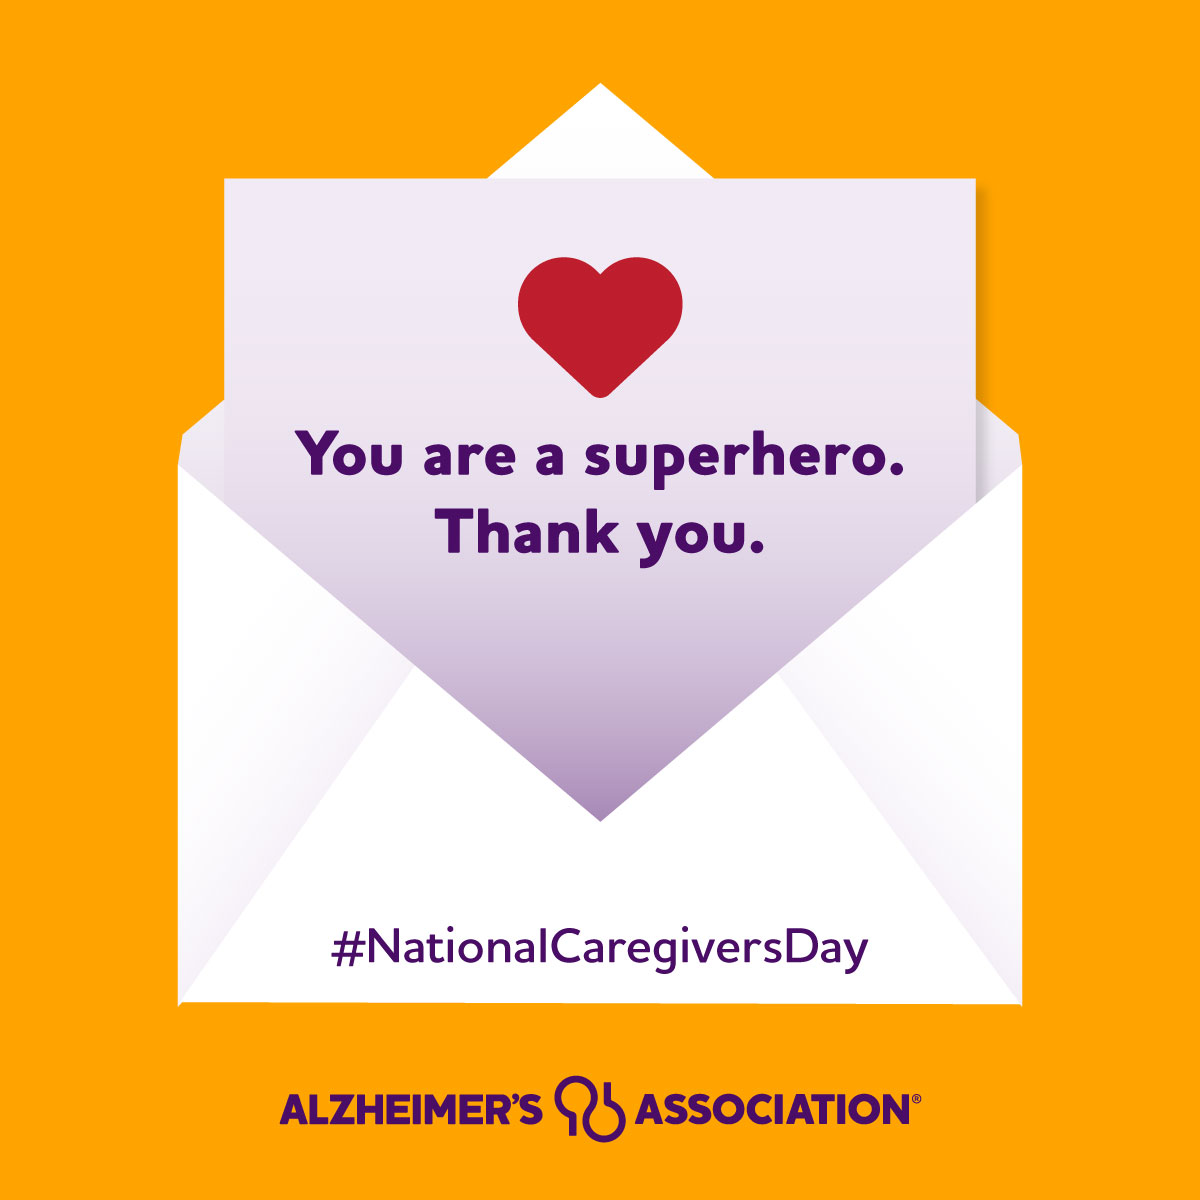 Share to thank a caregiver in your life in honor of #NationalCaregiversDay.